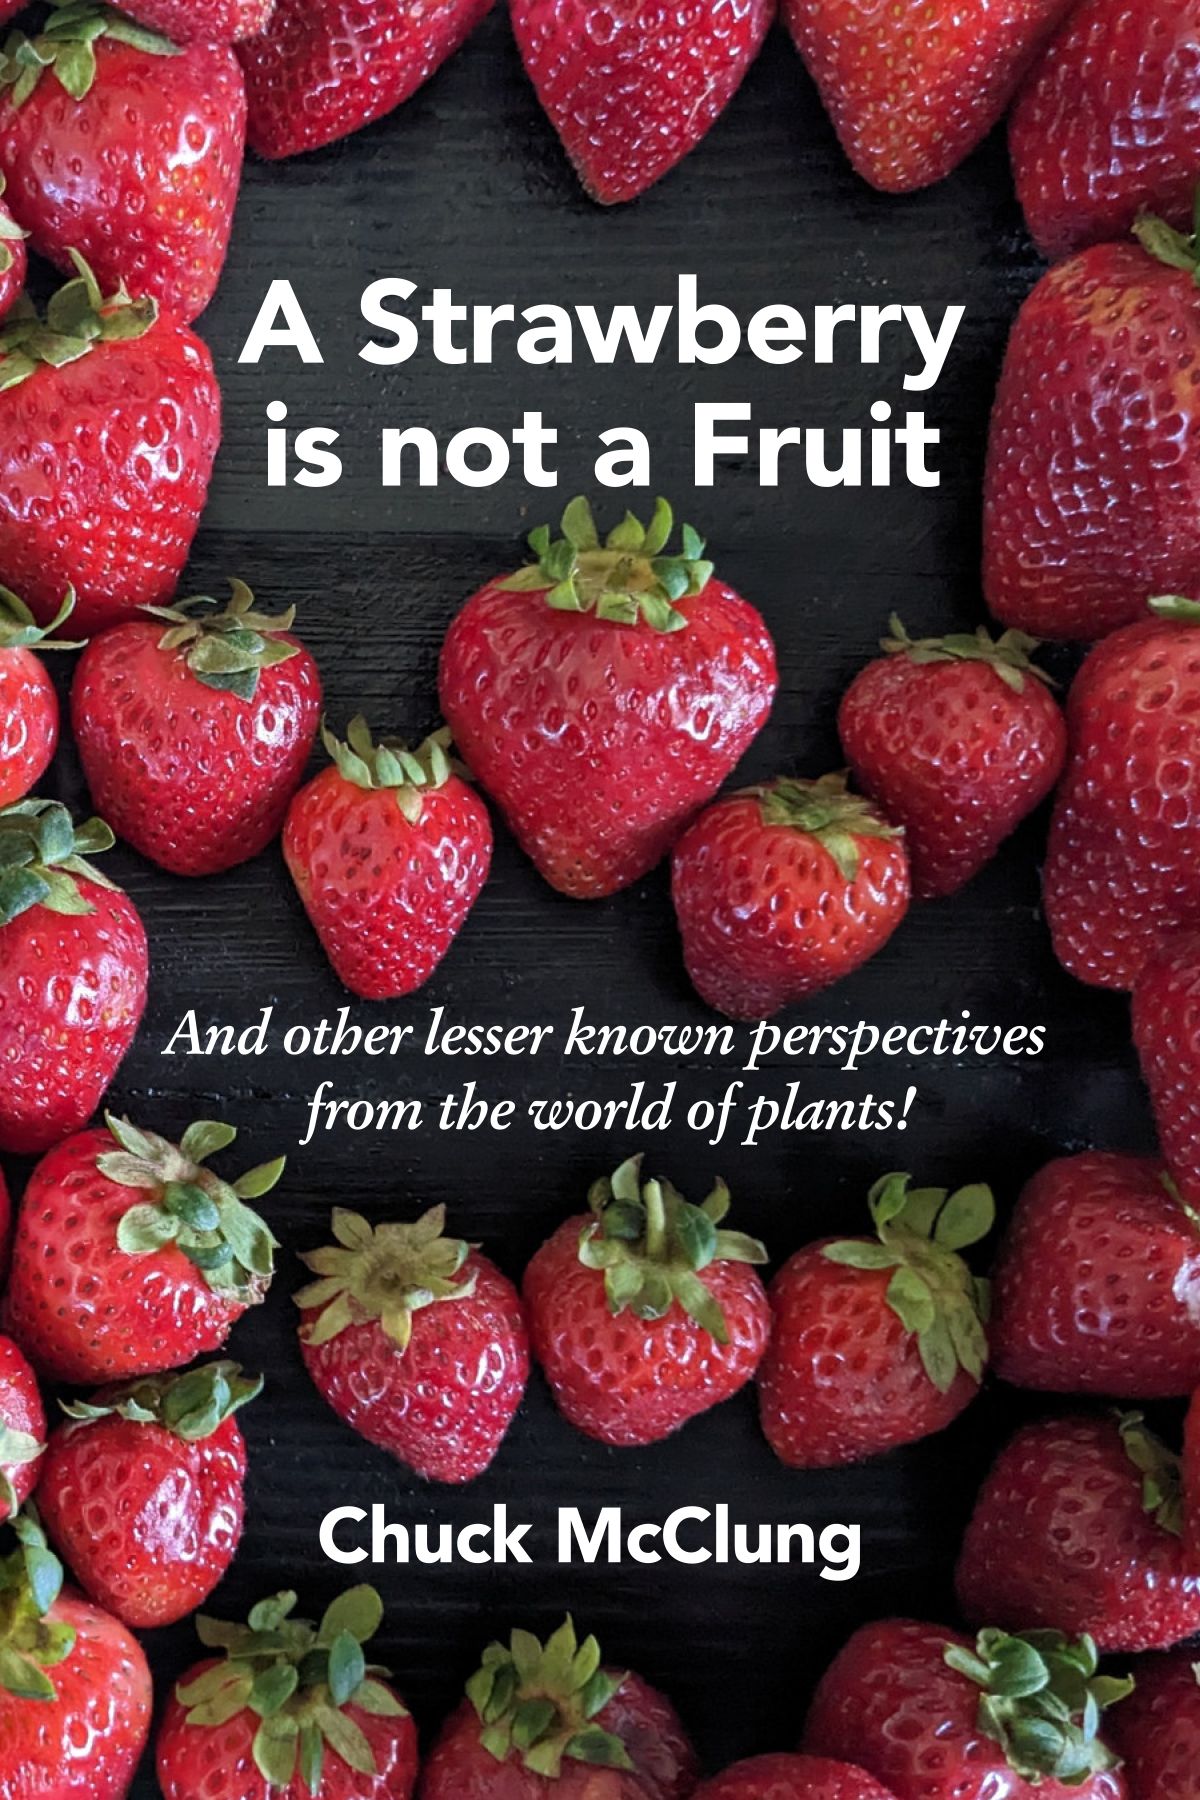 POWAY:  A Strawberry is Not a Fruit with Chuck McClung (and book signing)